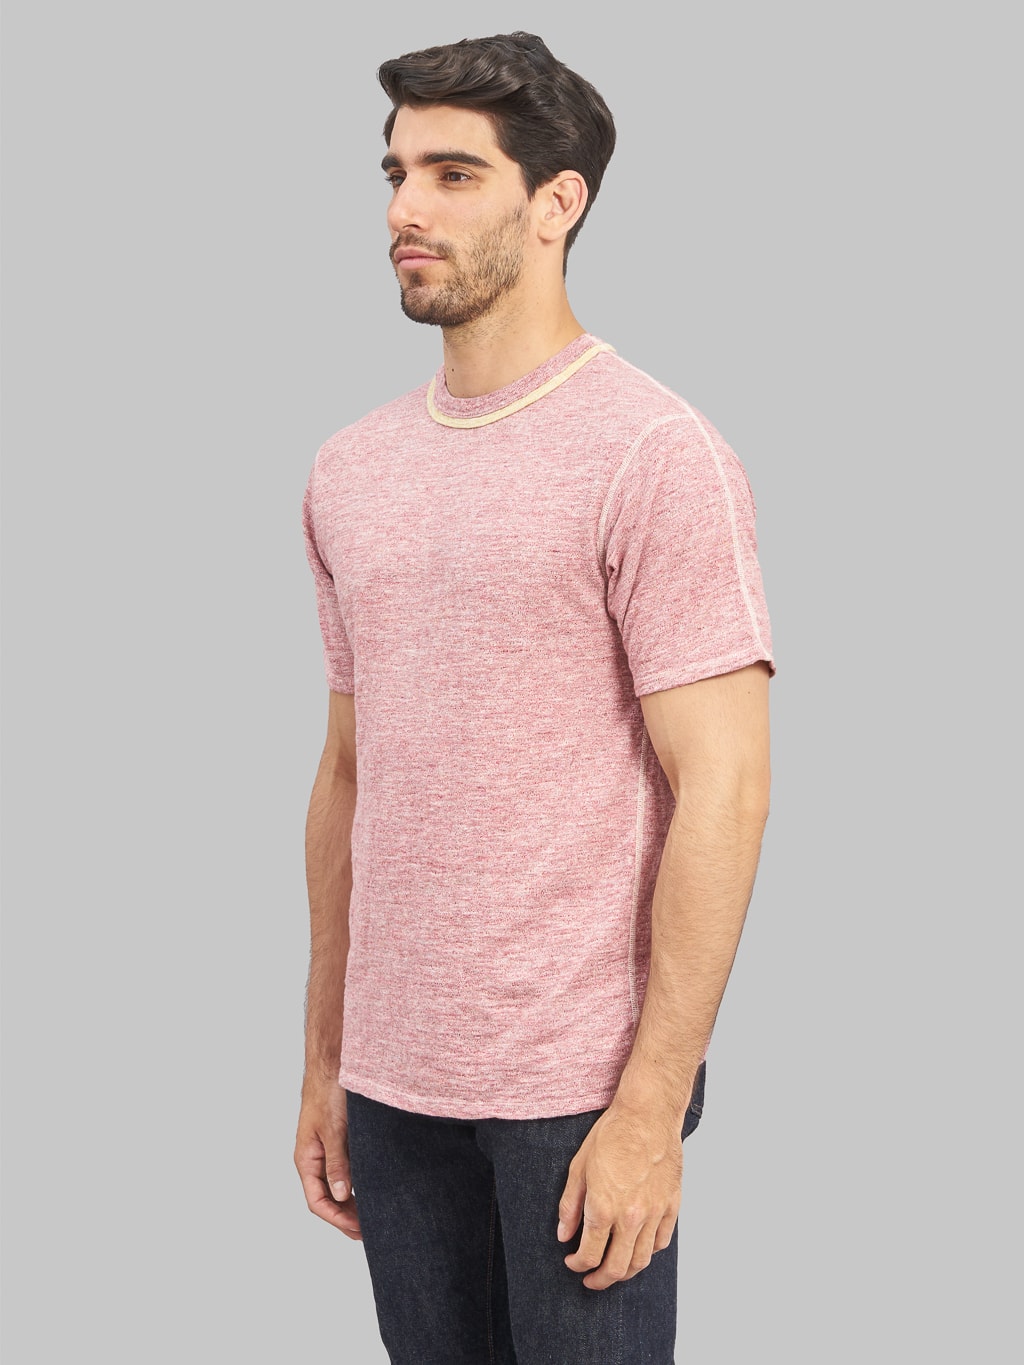 loop and weft double binder neck heather tshirt cherry side fit